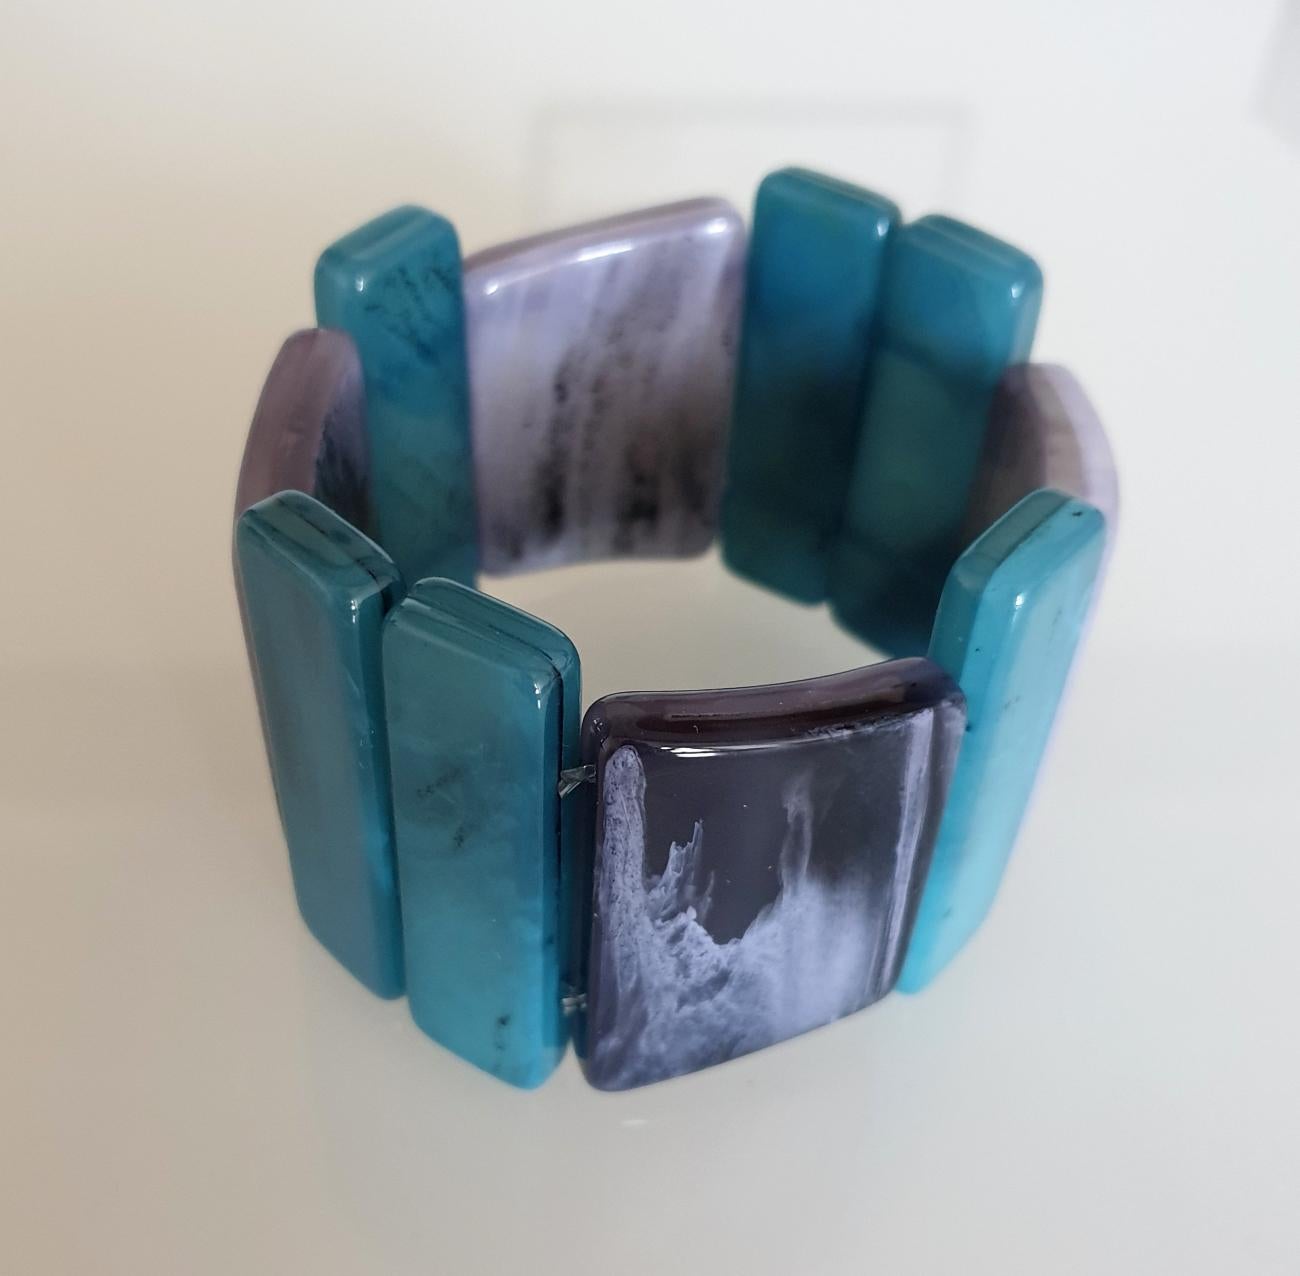 Mid Century Bakelite bracelet, France circa 1970s.
Some black veins on the Bakelite.
The blue elements are a little higher, and the gray ones not straight, 
giving a lot of style to the bracelet.
Excellent condition.